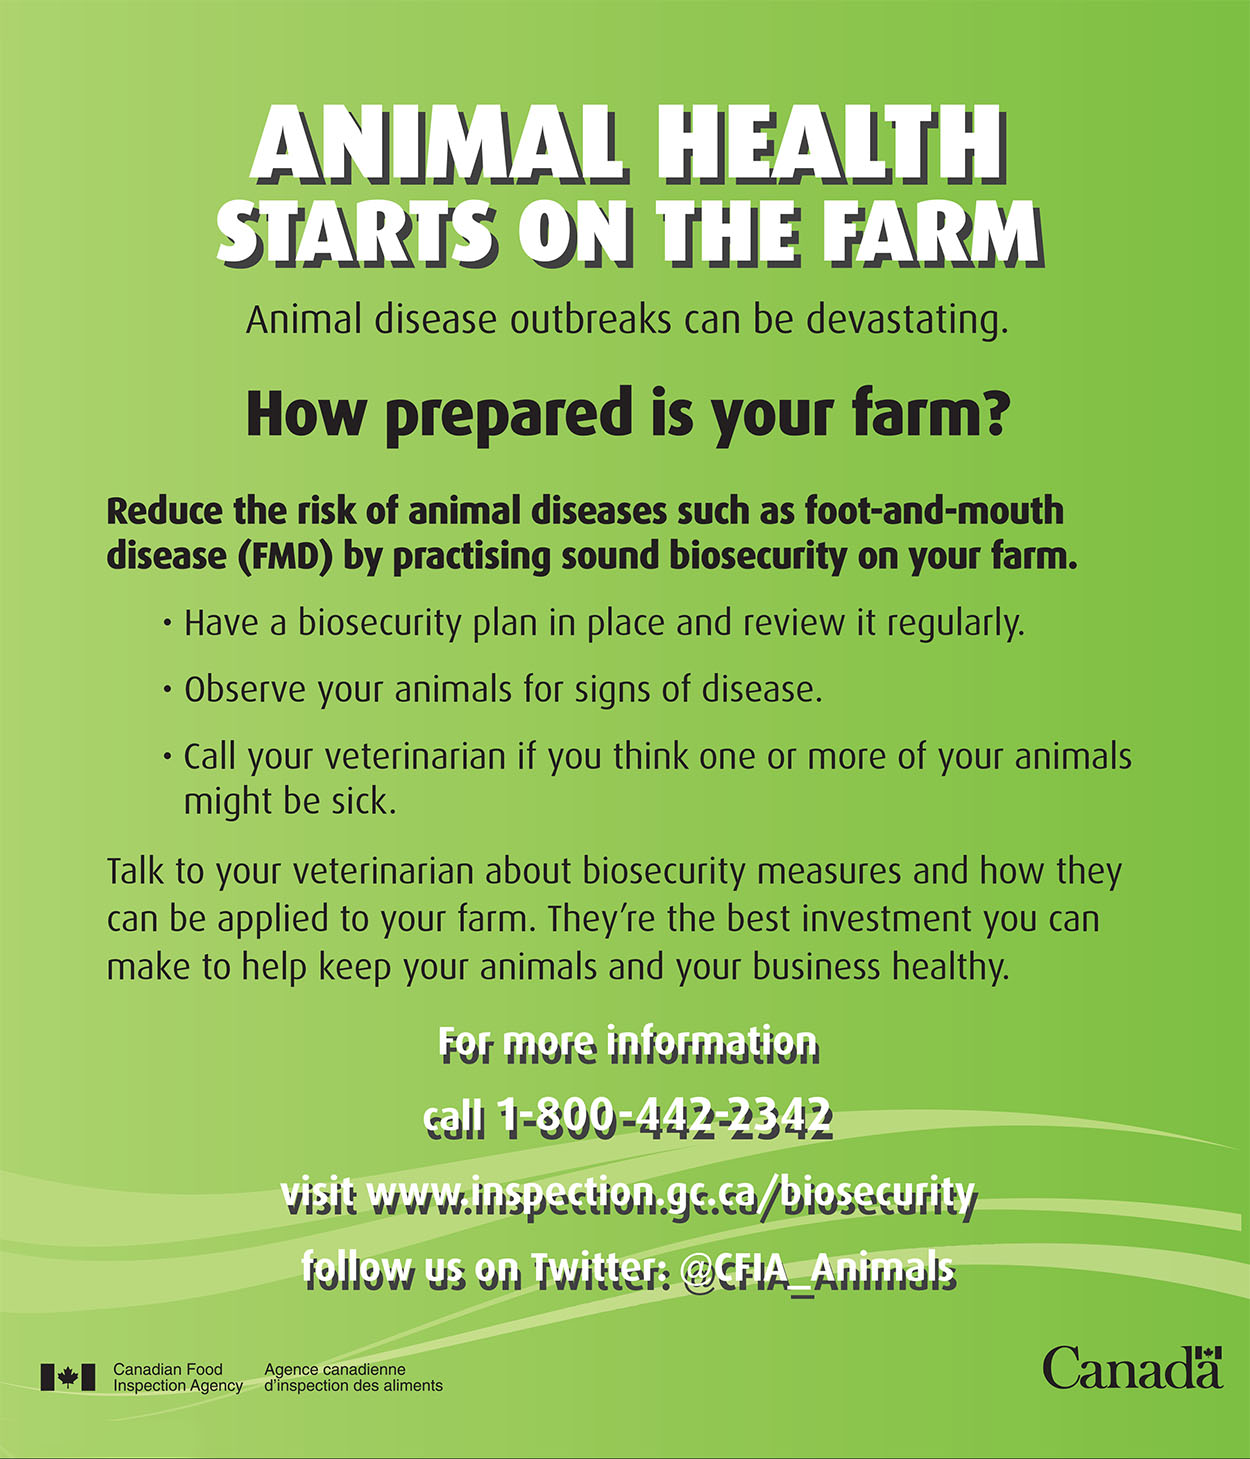 Government of Canada “Animal Health” Print Ad – Compass Communications